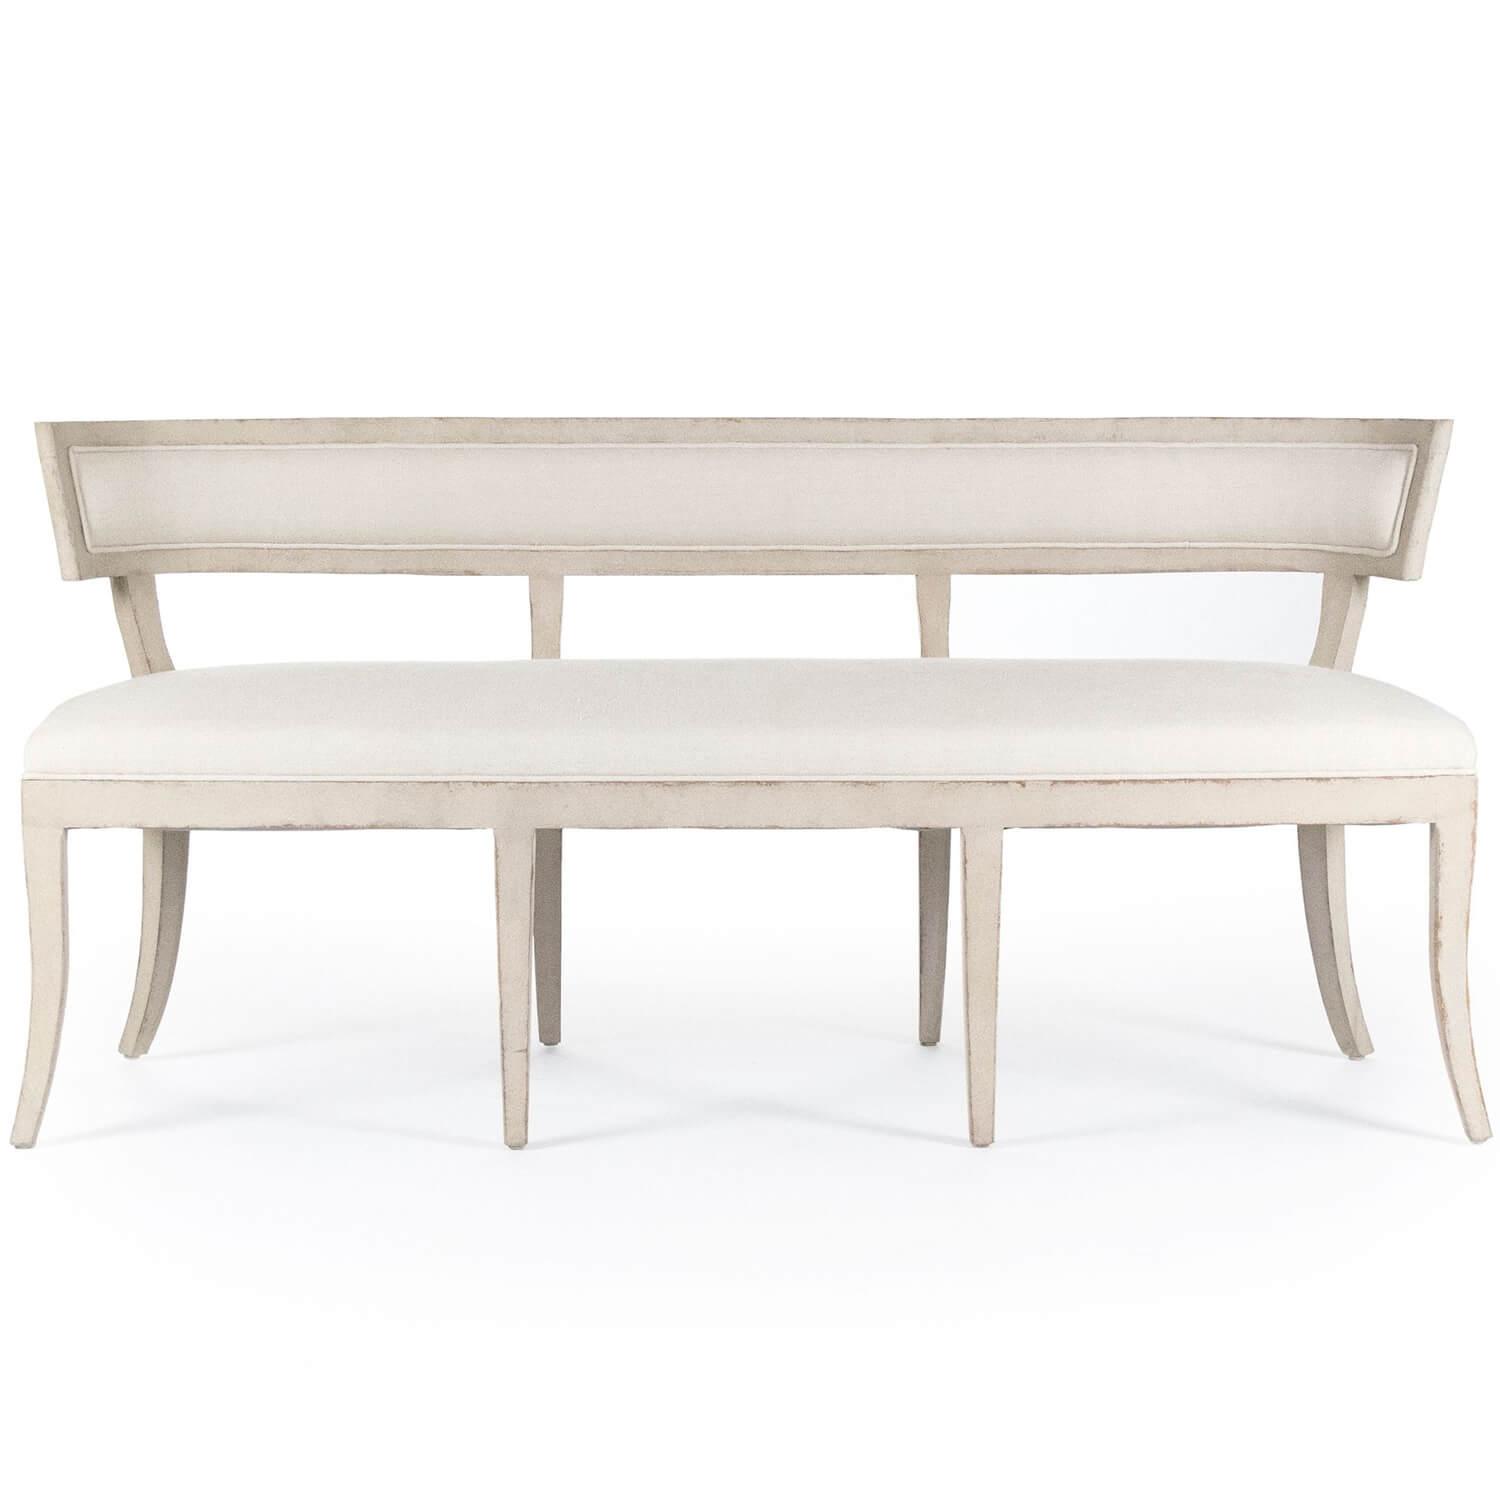 French Shabby Chic Bench - Belle Escape